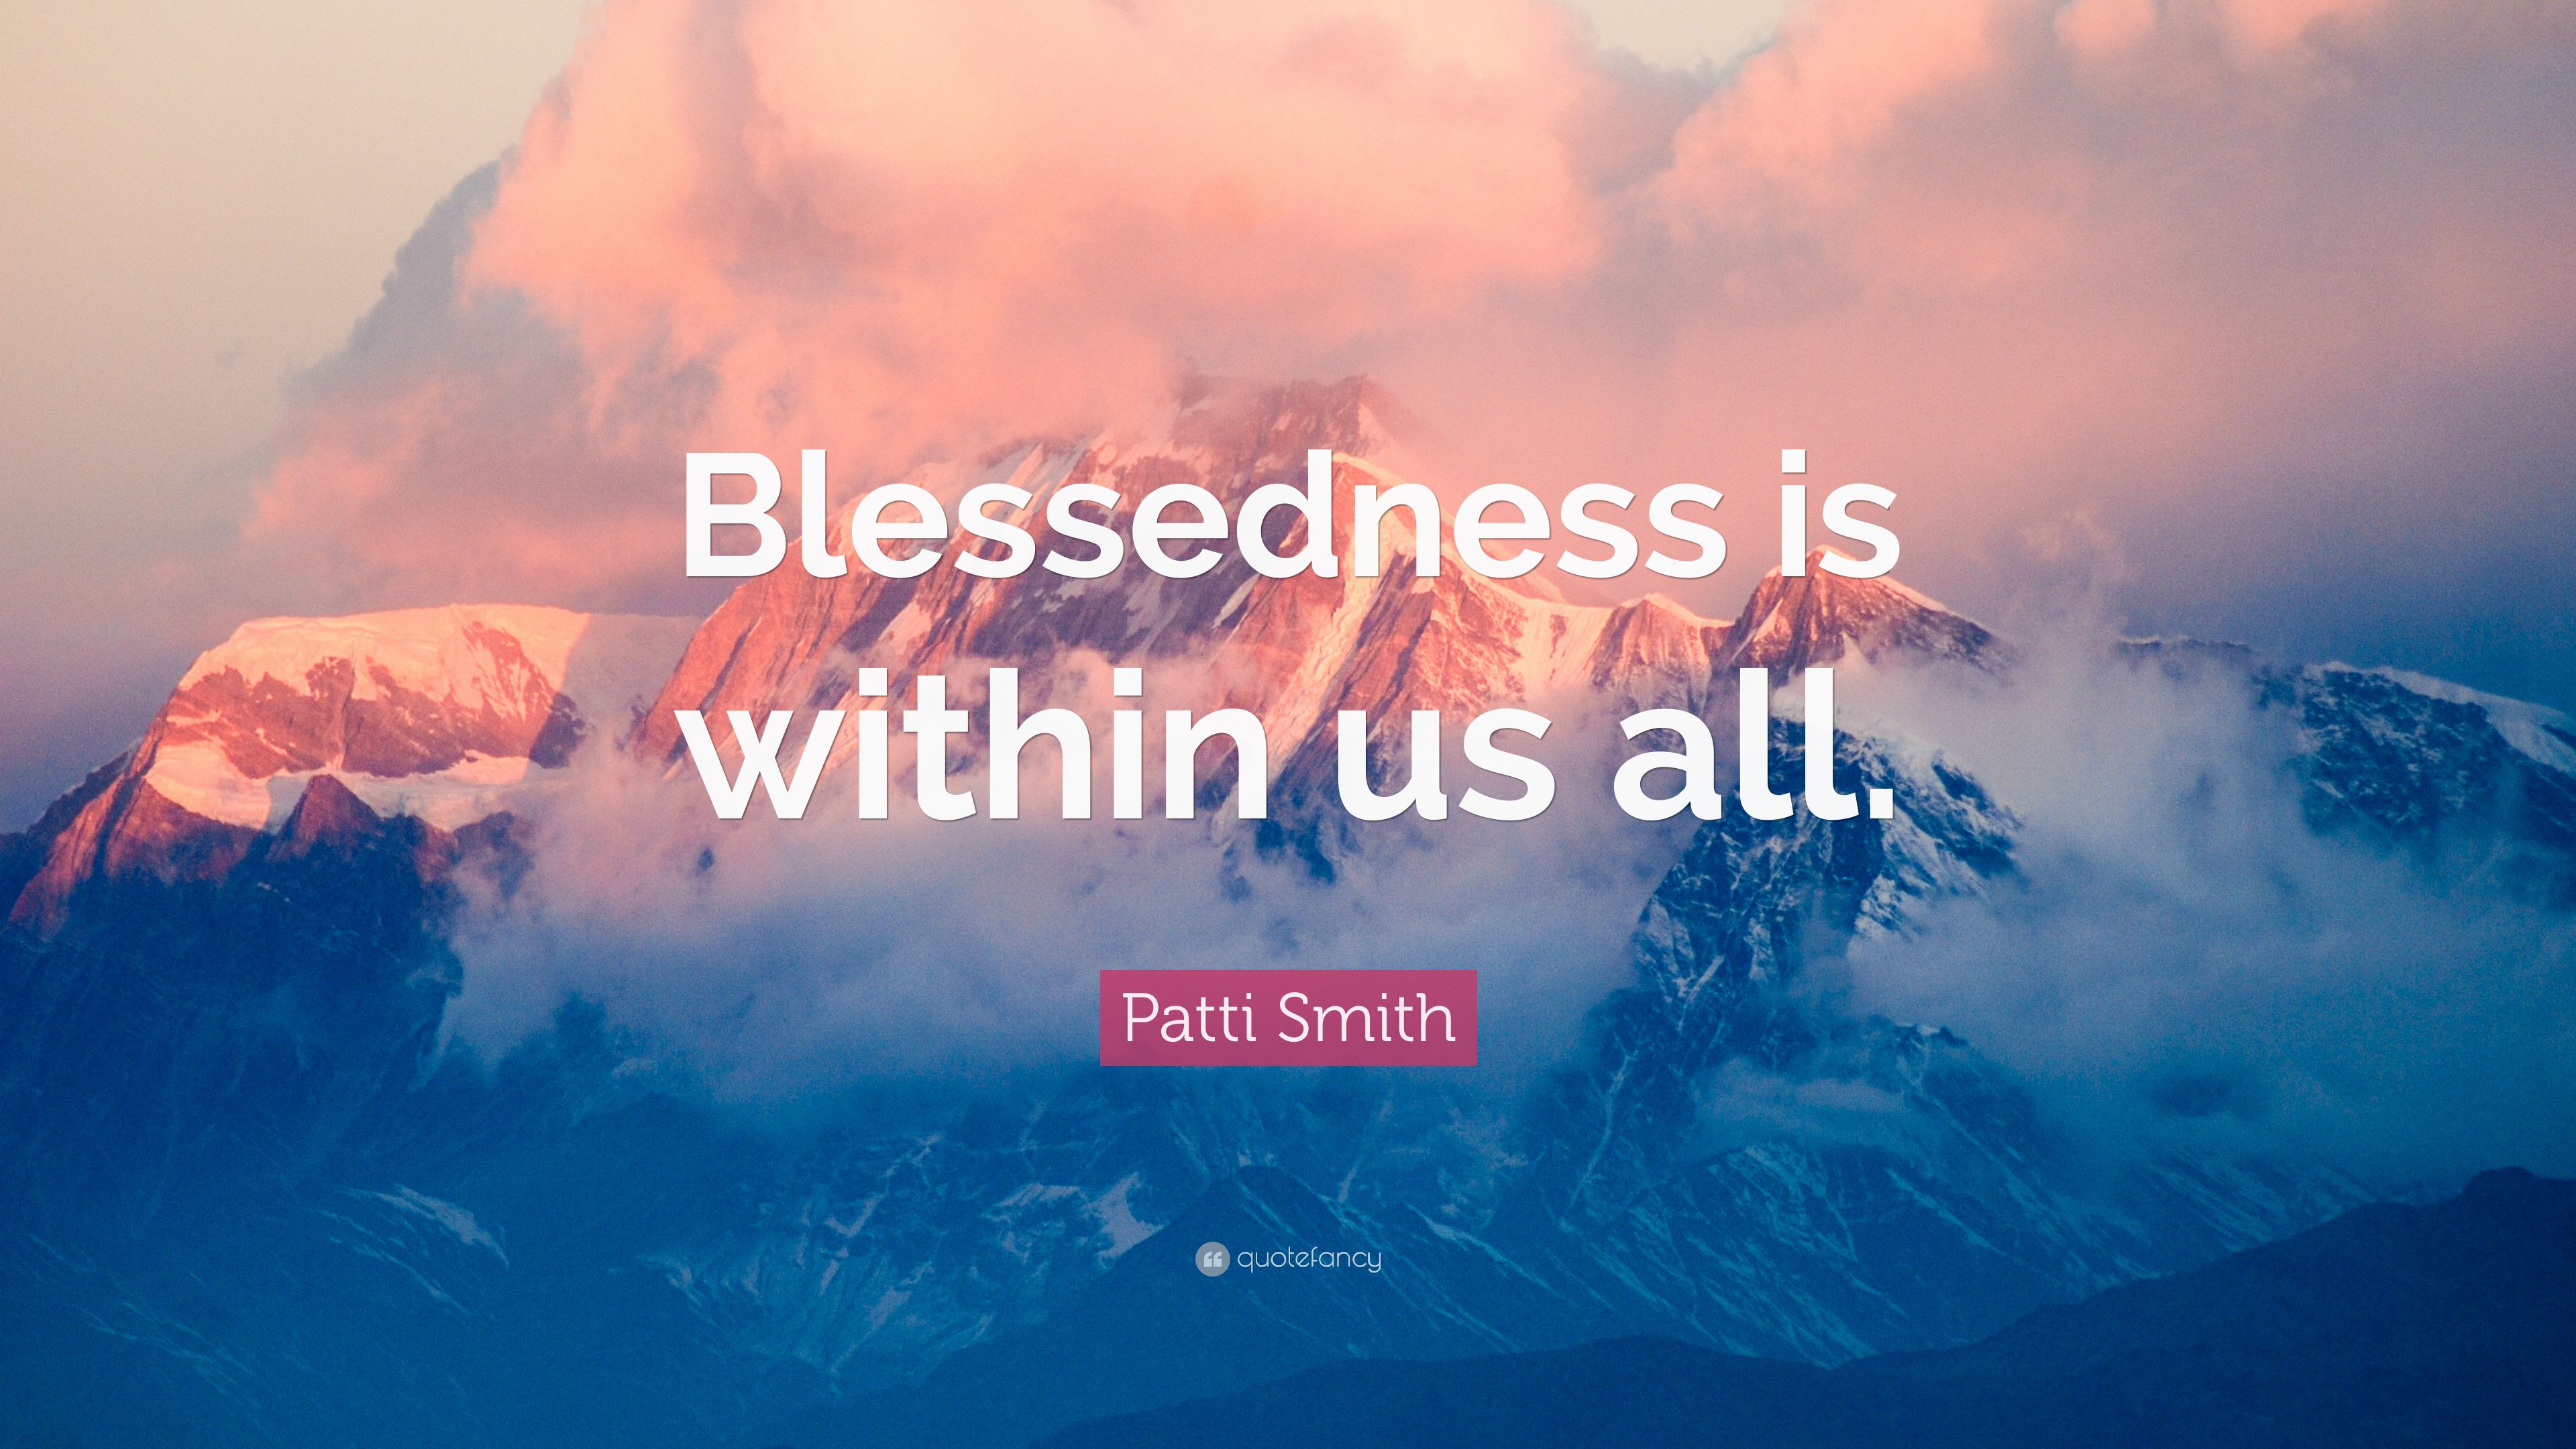 Patti Smith Quote: “Blessedness is within us all.” 6 wallpaper